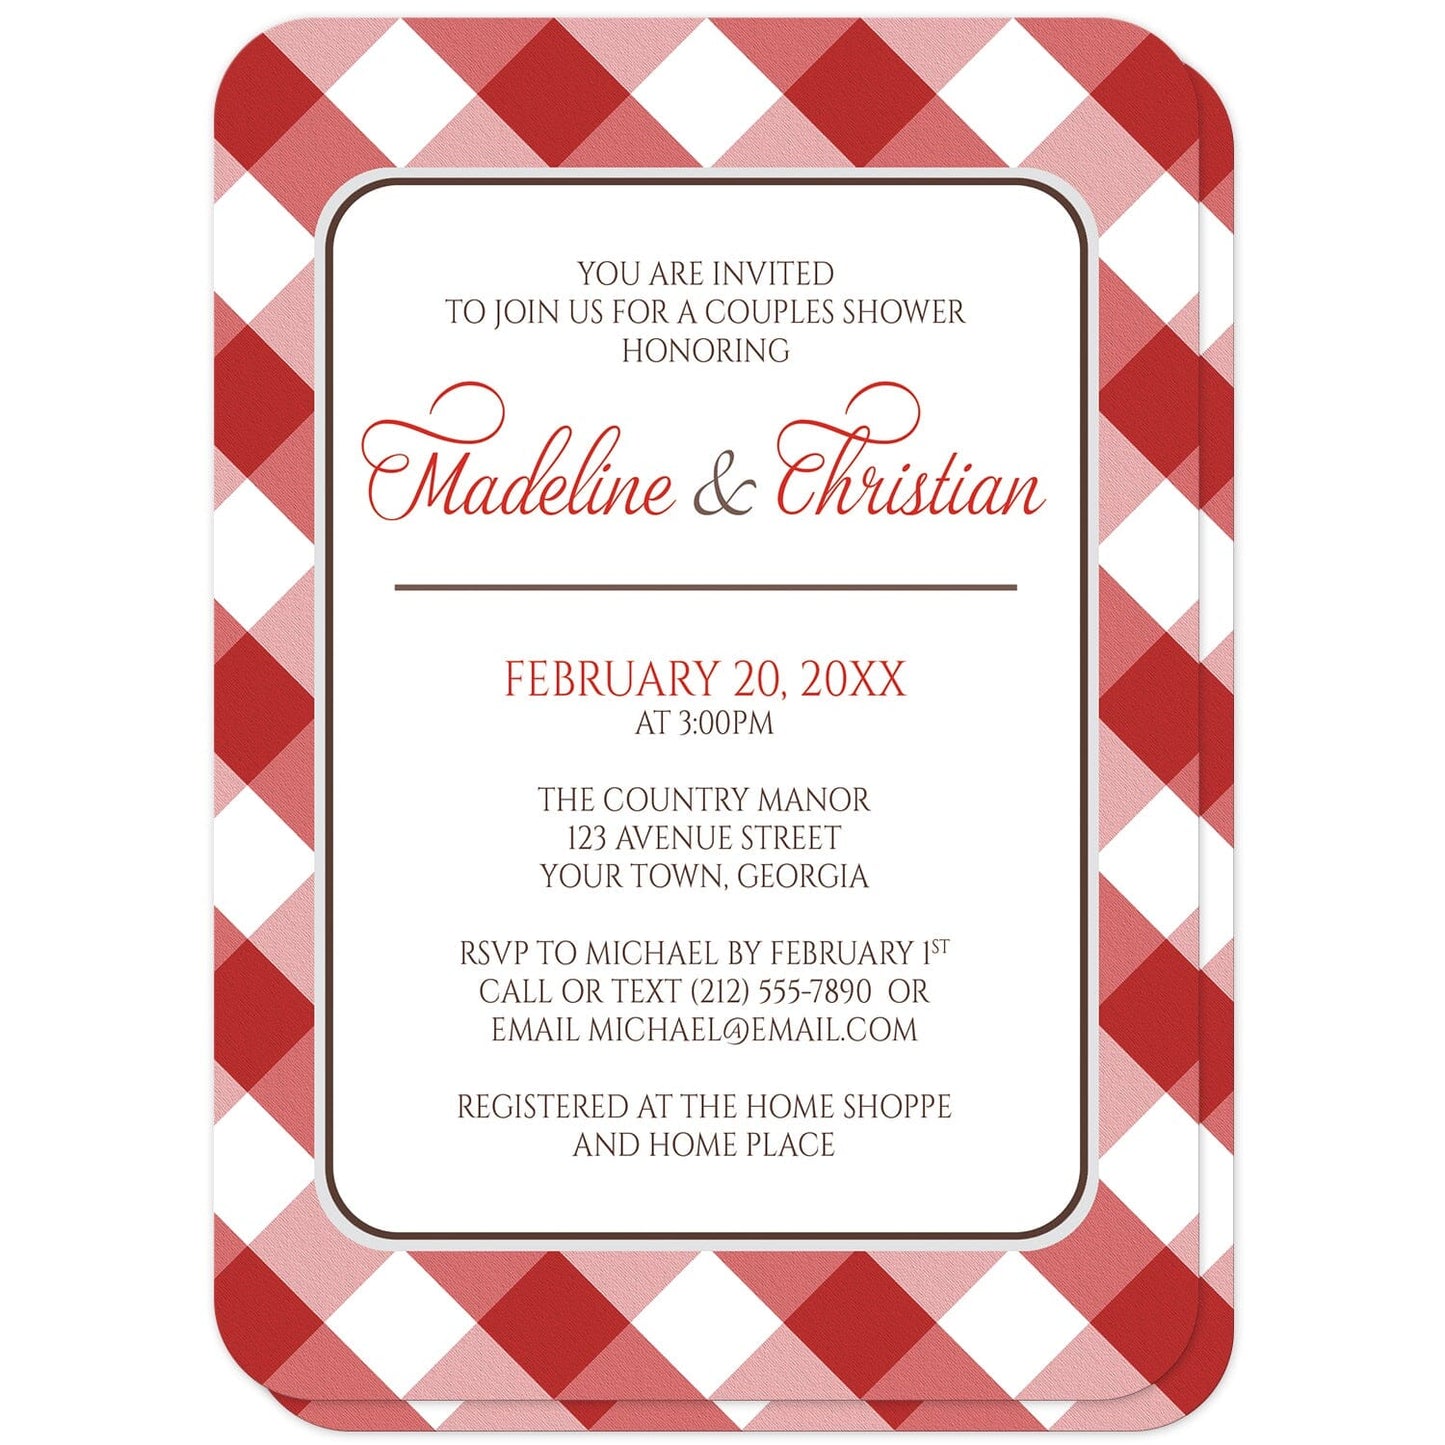 Red Gingham Couples Shower Invitations (with rounded corners) at Artistically Invited. Red gingham couples shower invitations with your personalized couples shower celebration details custom printed in red and brown on white in the center, over a diagonal red gingham check pattern background. The red and white gingham pattern is also printed on the back side.